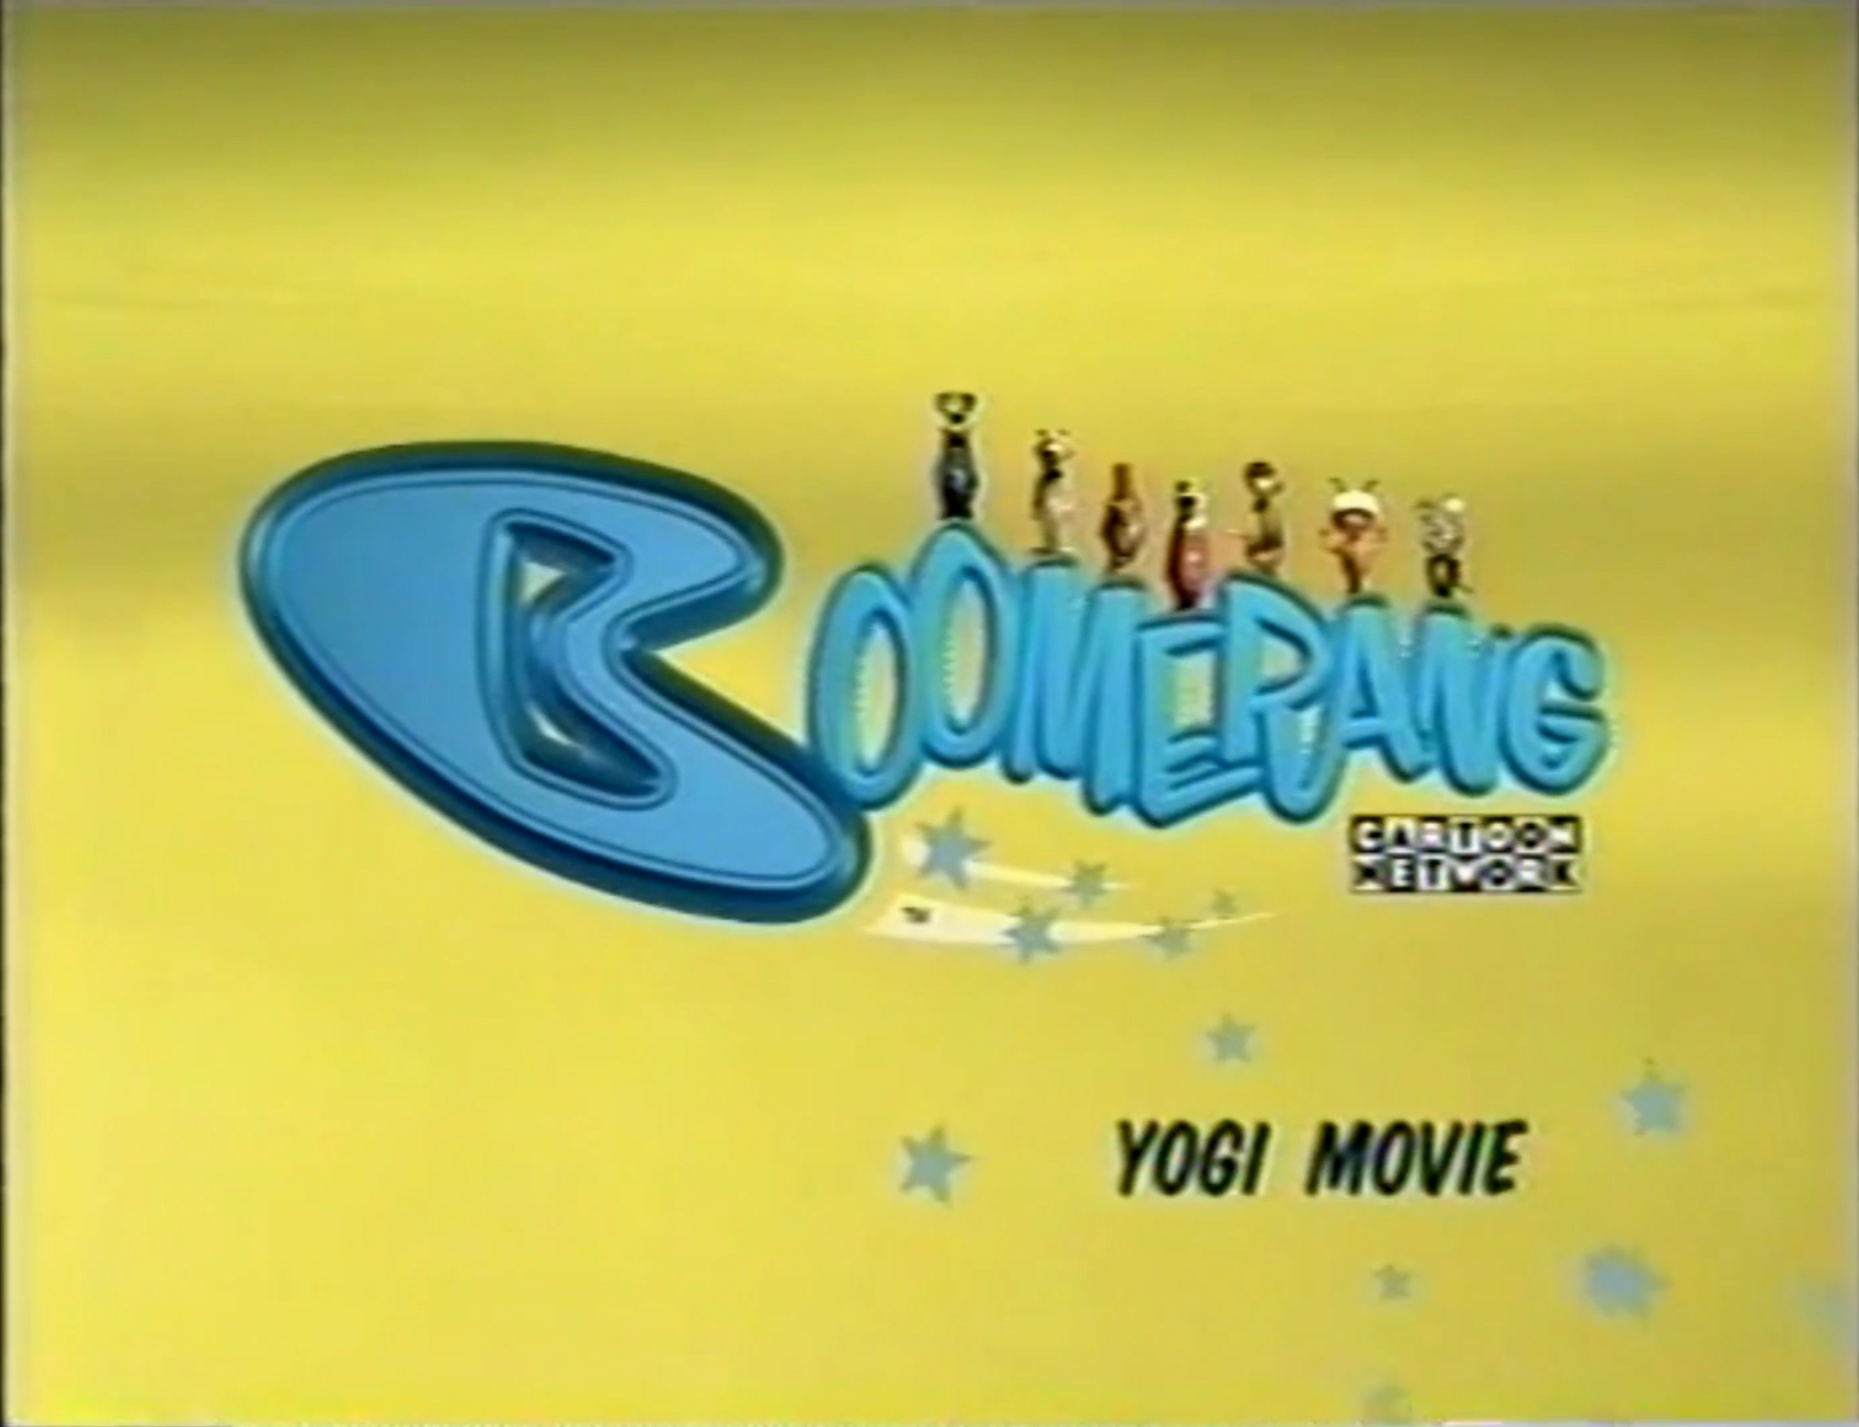 Boomerang Yogi Marathon bumpers - Boomerang USA (partially lost bumpers and promos from Cartoon Network spin-off channel; 2000-2015)